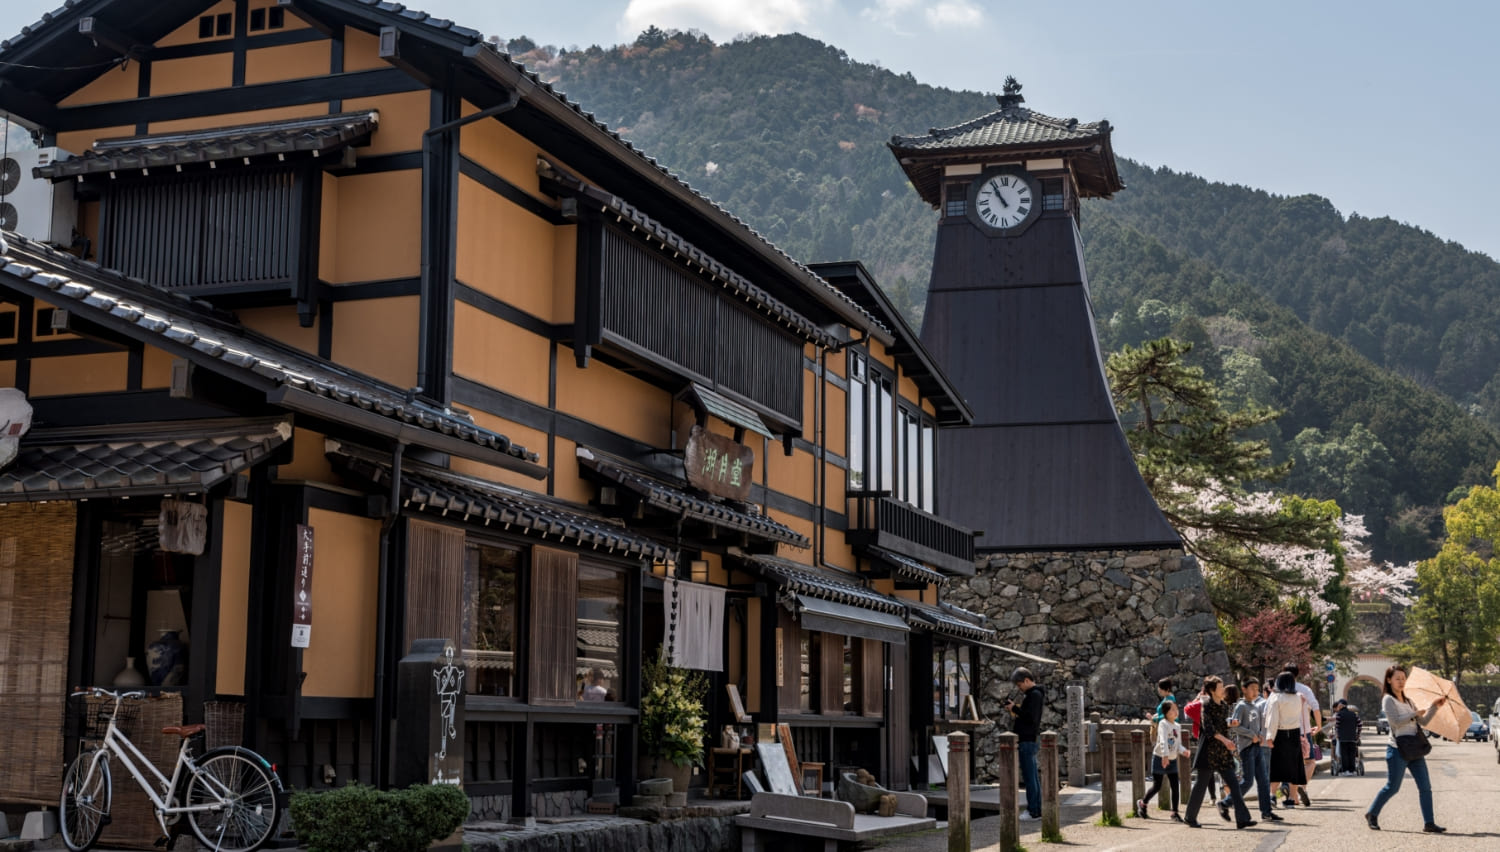 Important Preservation Districts for Groups of Traditional A (guided) tour that enables you to learn the cultures and history of a castle town, Izushi01